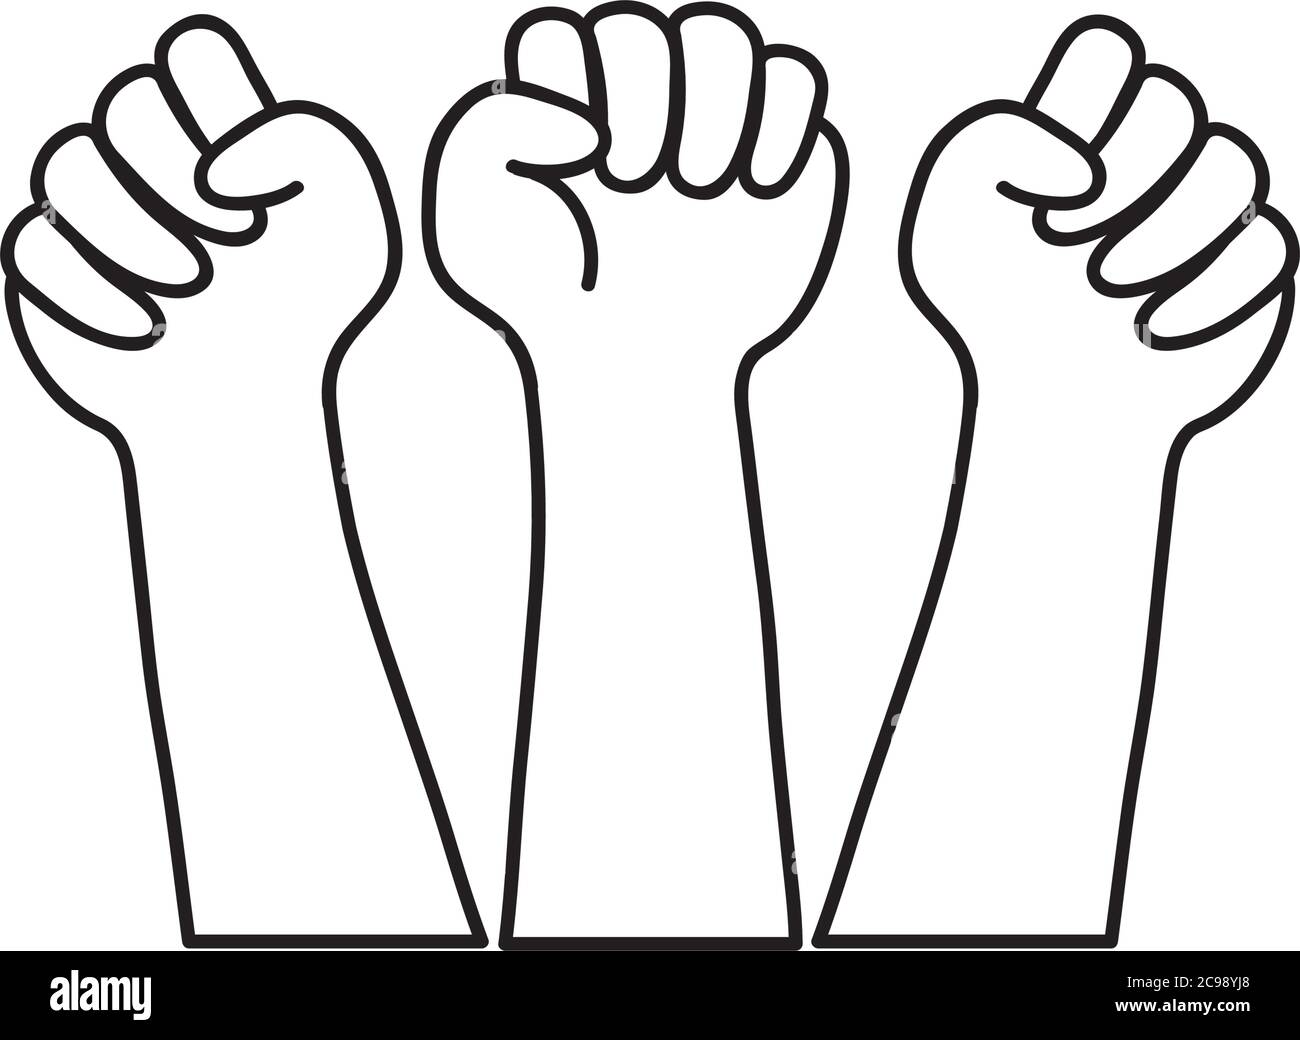 protesting concept, hands protesting over white background, line style, vector illustration Stock Vector